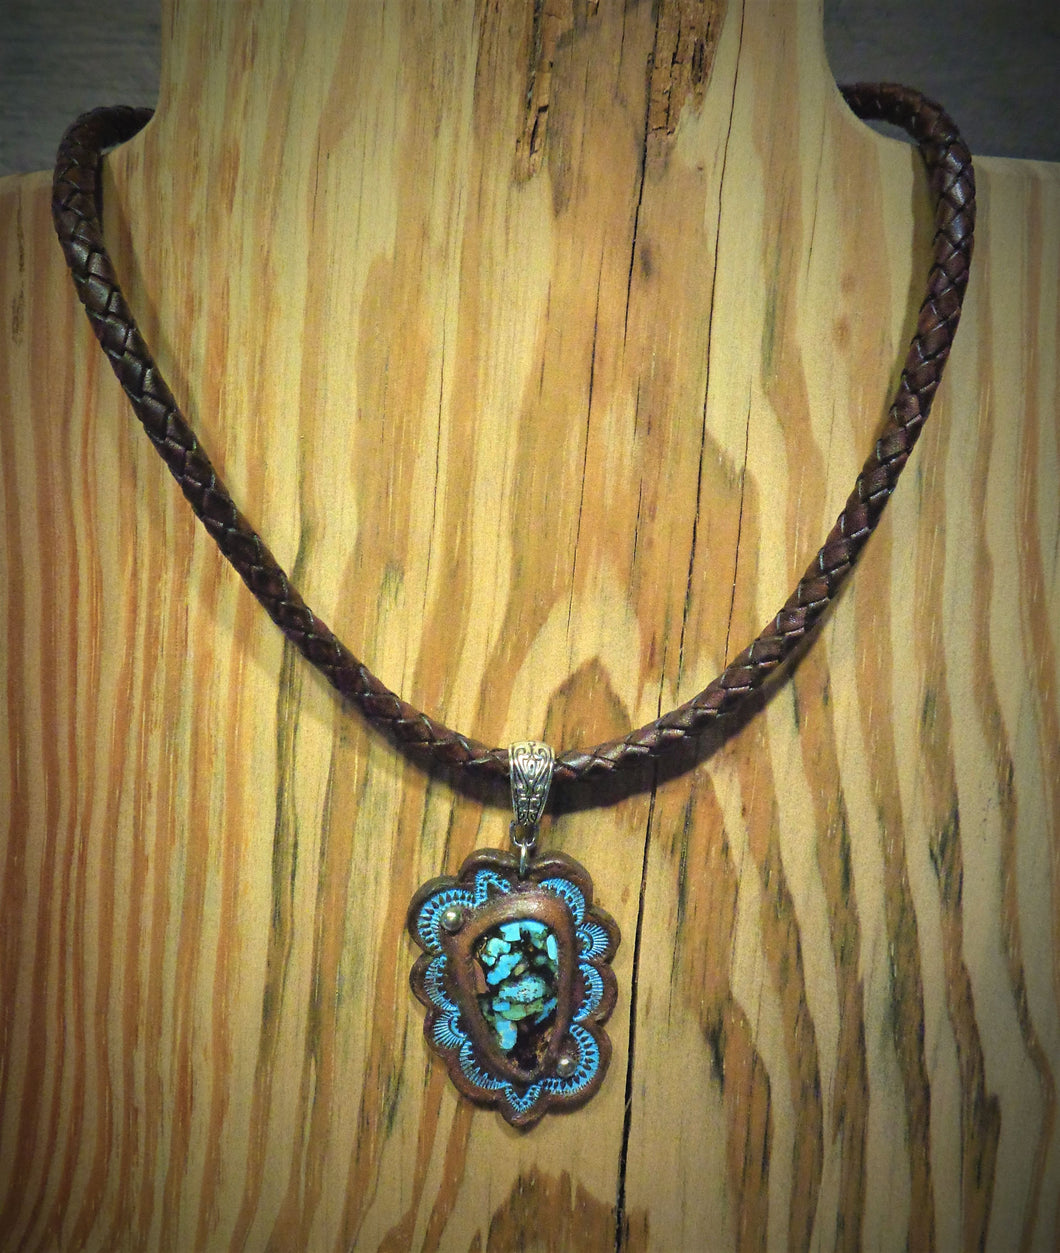 Hand Tooled Leather Pendant with Douglas Fir and Globe Turquoise Inlay